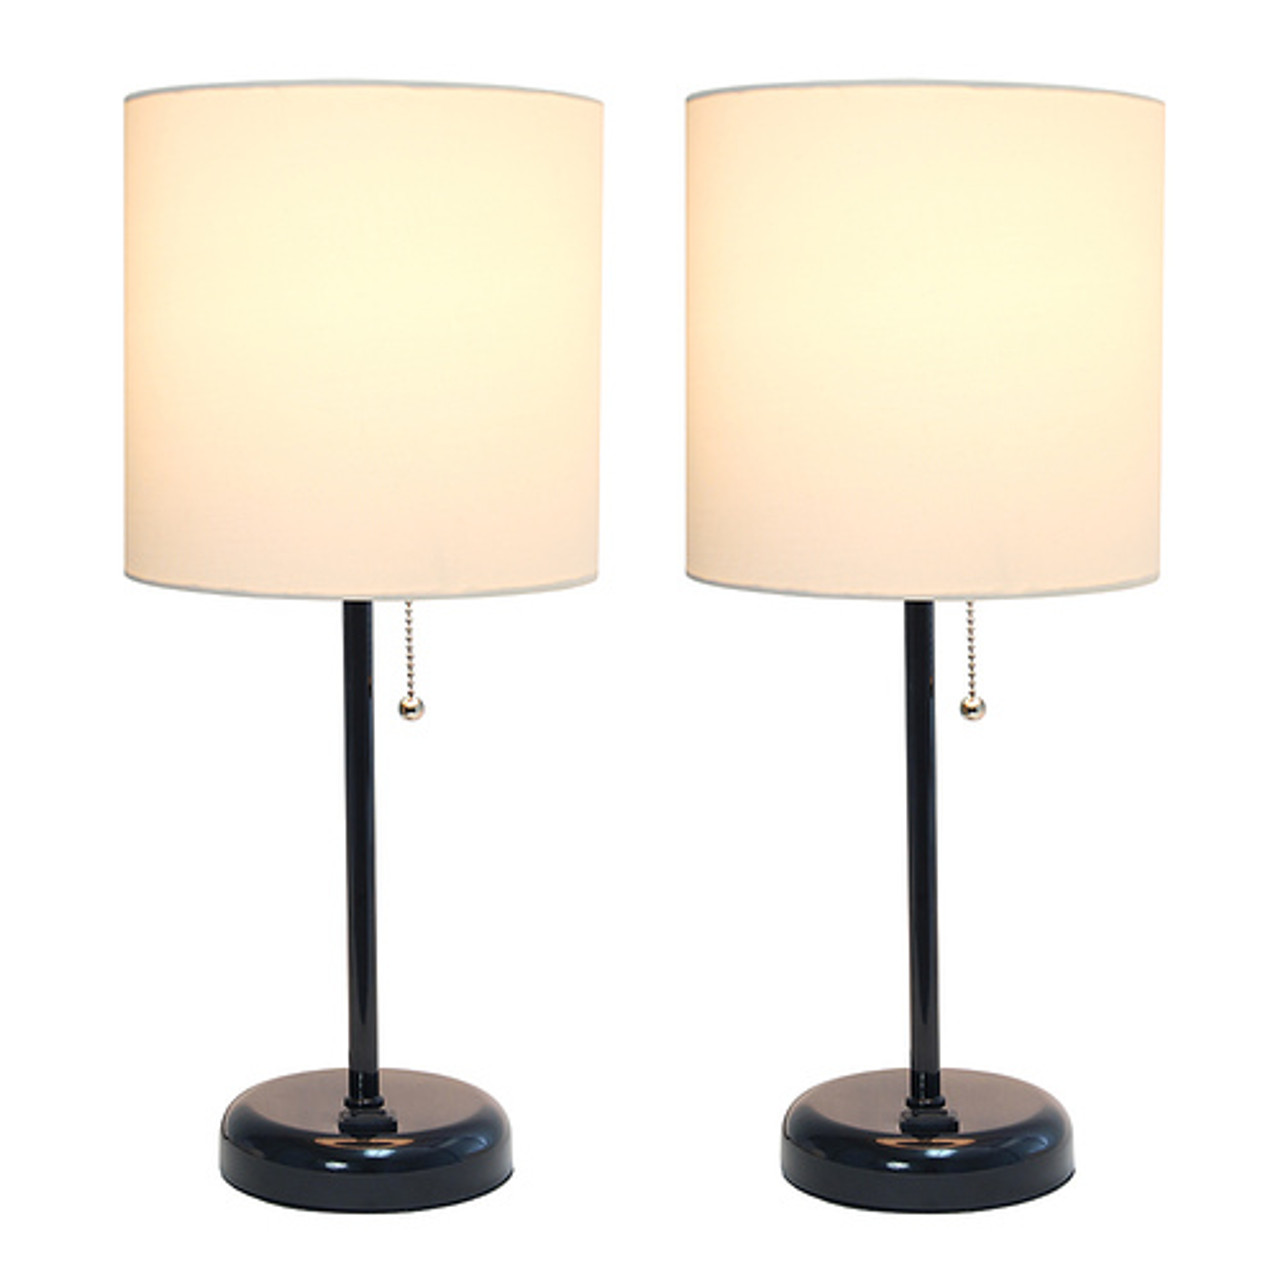 LimeLights Black Stick Lamp with Charging Outlet and Fabric Shade 2 Pack Set, White